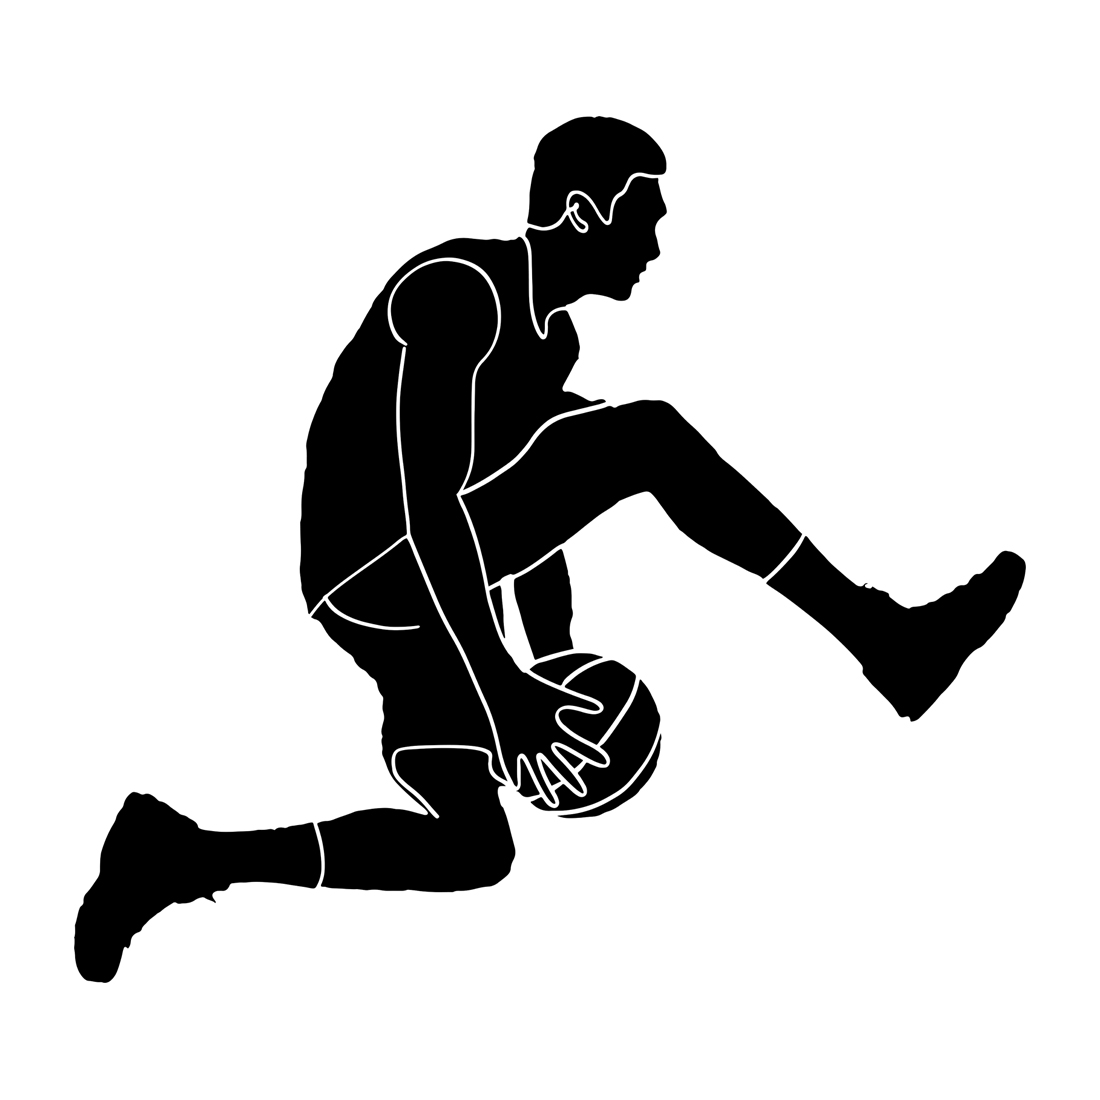 Silhouette of Basketball Player Soaring with Ball, Vector Illustration of Basketball Player Jumping High, Silhouetted Basketball Player in Mid-Air Leap preview image.